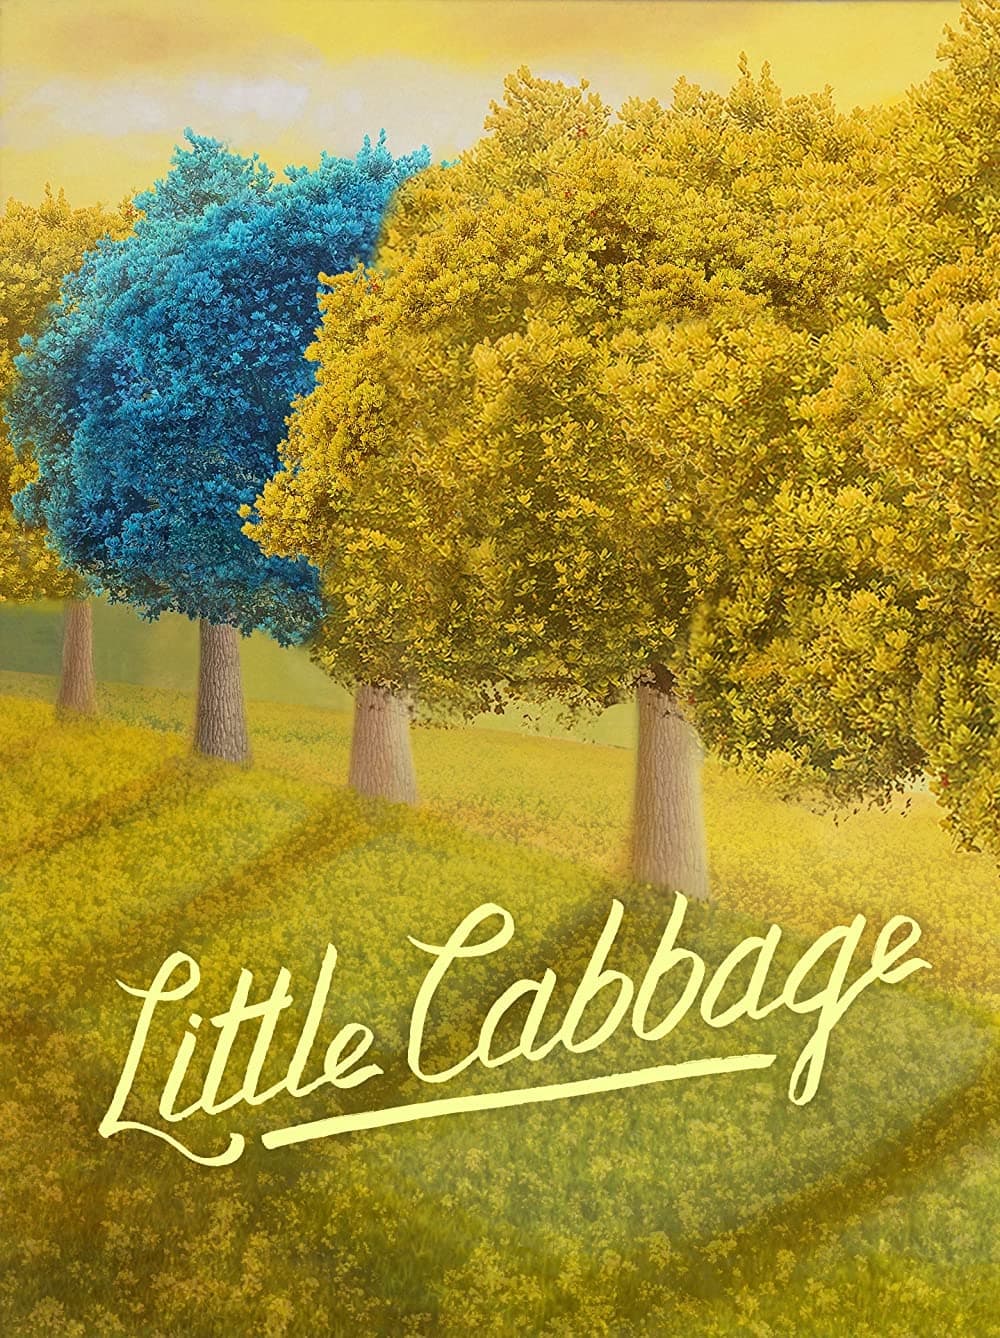 Little Cabbage